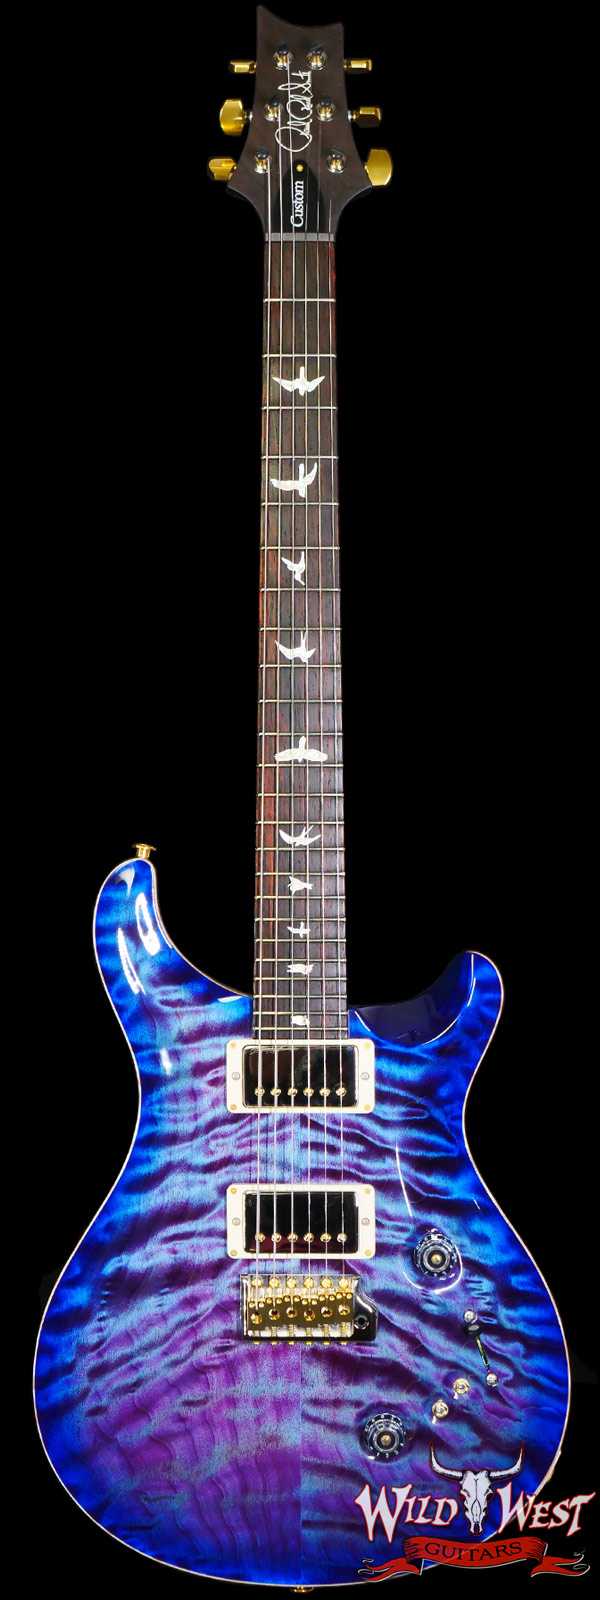 Paul Reed Smith PRS Wood Library 10 Top Quilt Maple Custom 24-08 Brazilian Rosewood Board Violet Blue Burst